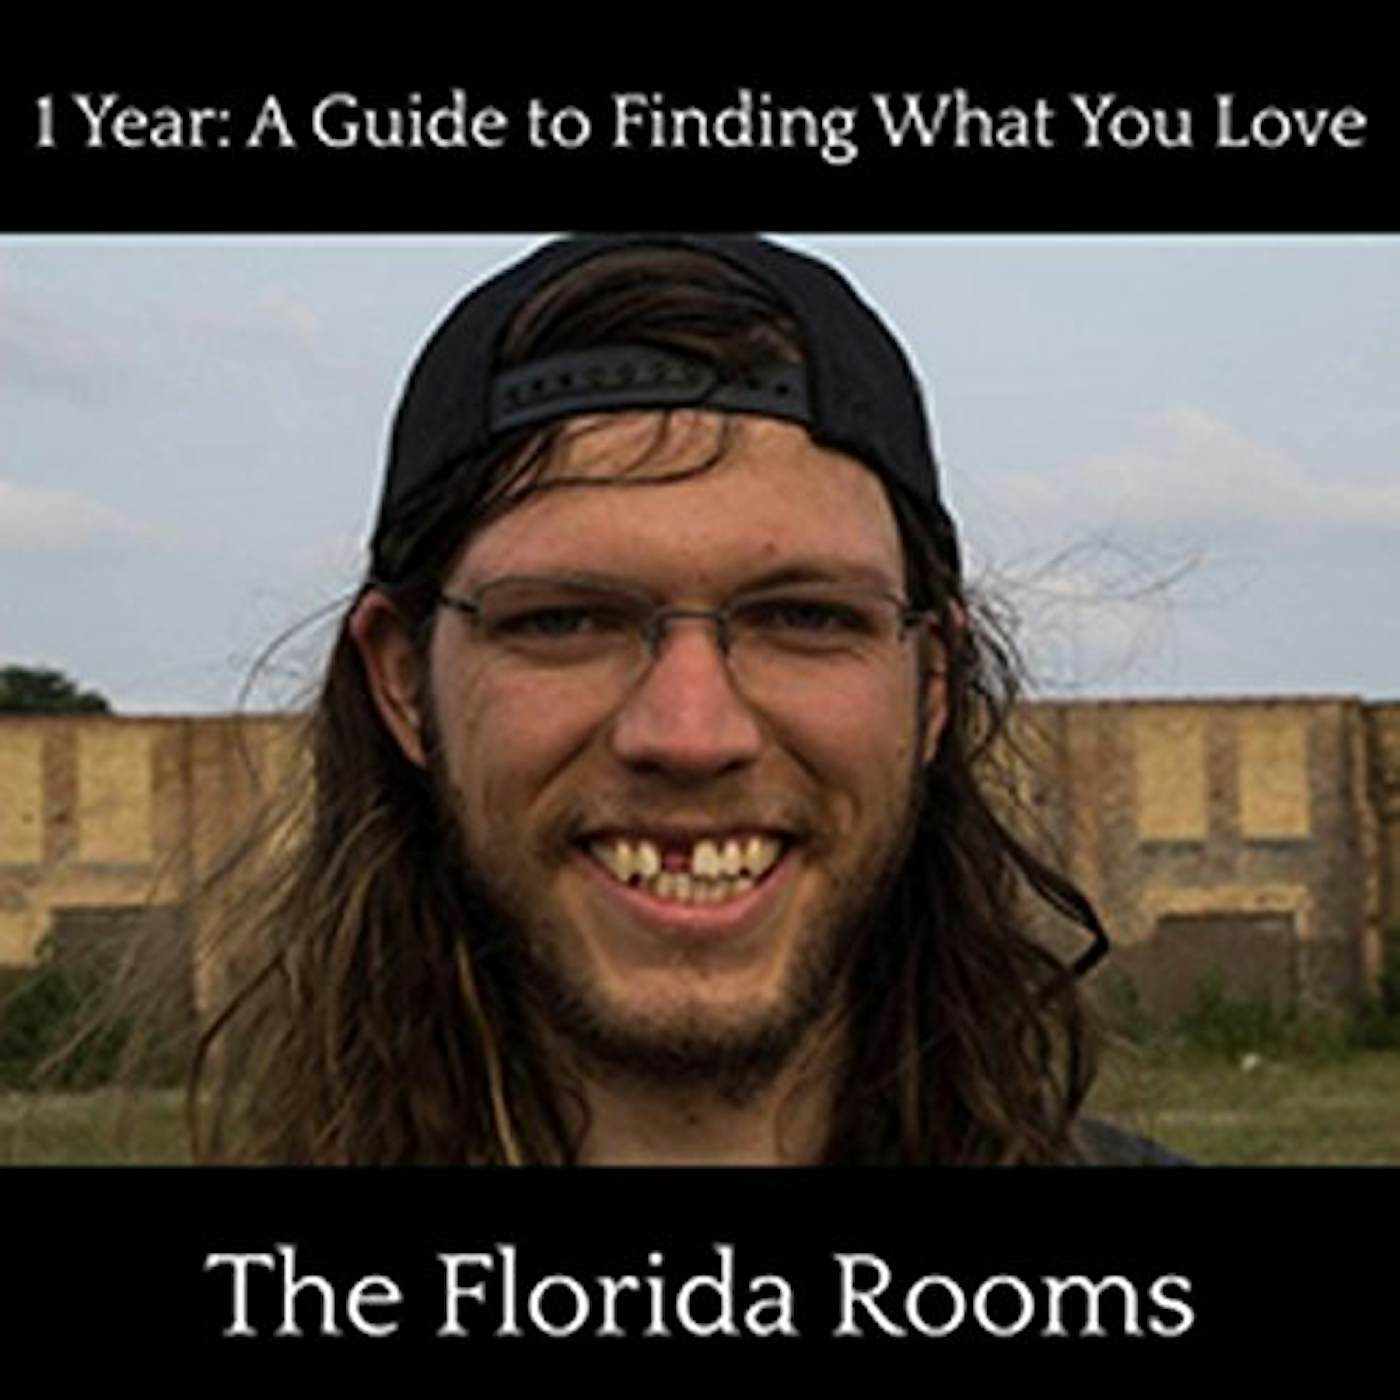 Florida Rooms 1 YEAR GUIDE TO FINDING WHAT YOU LOVE Vinyl Record